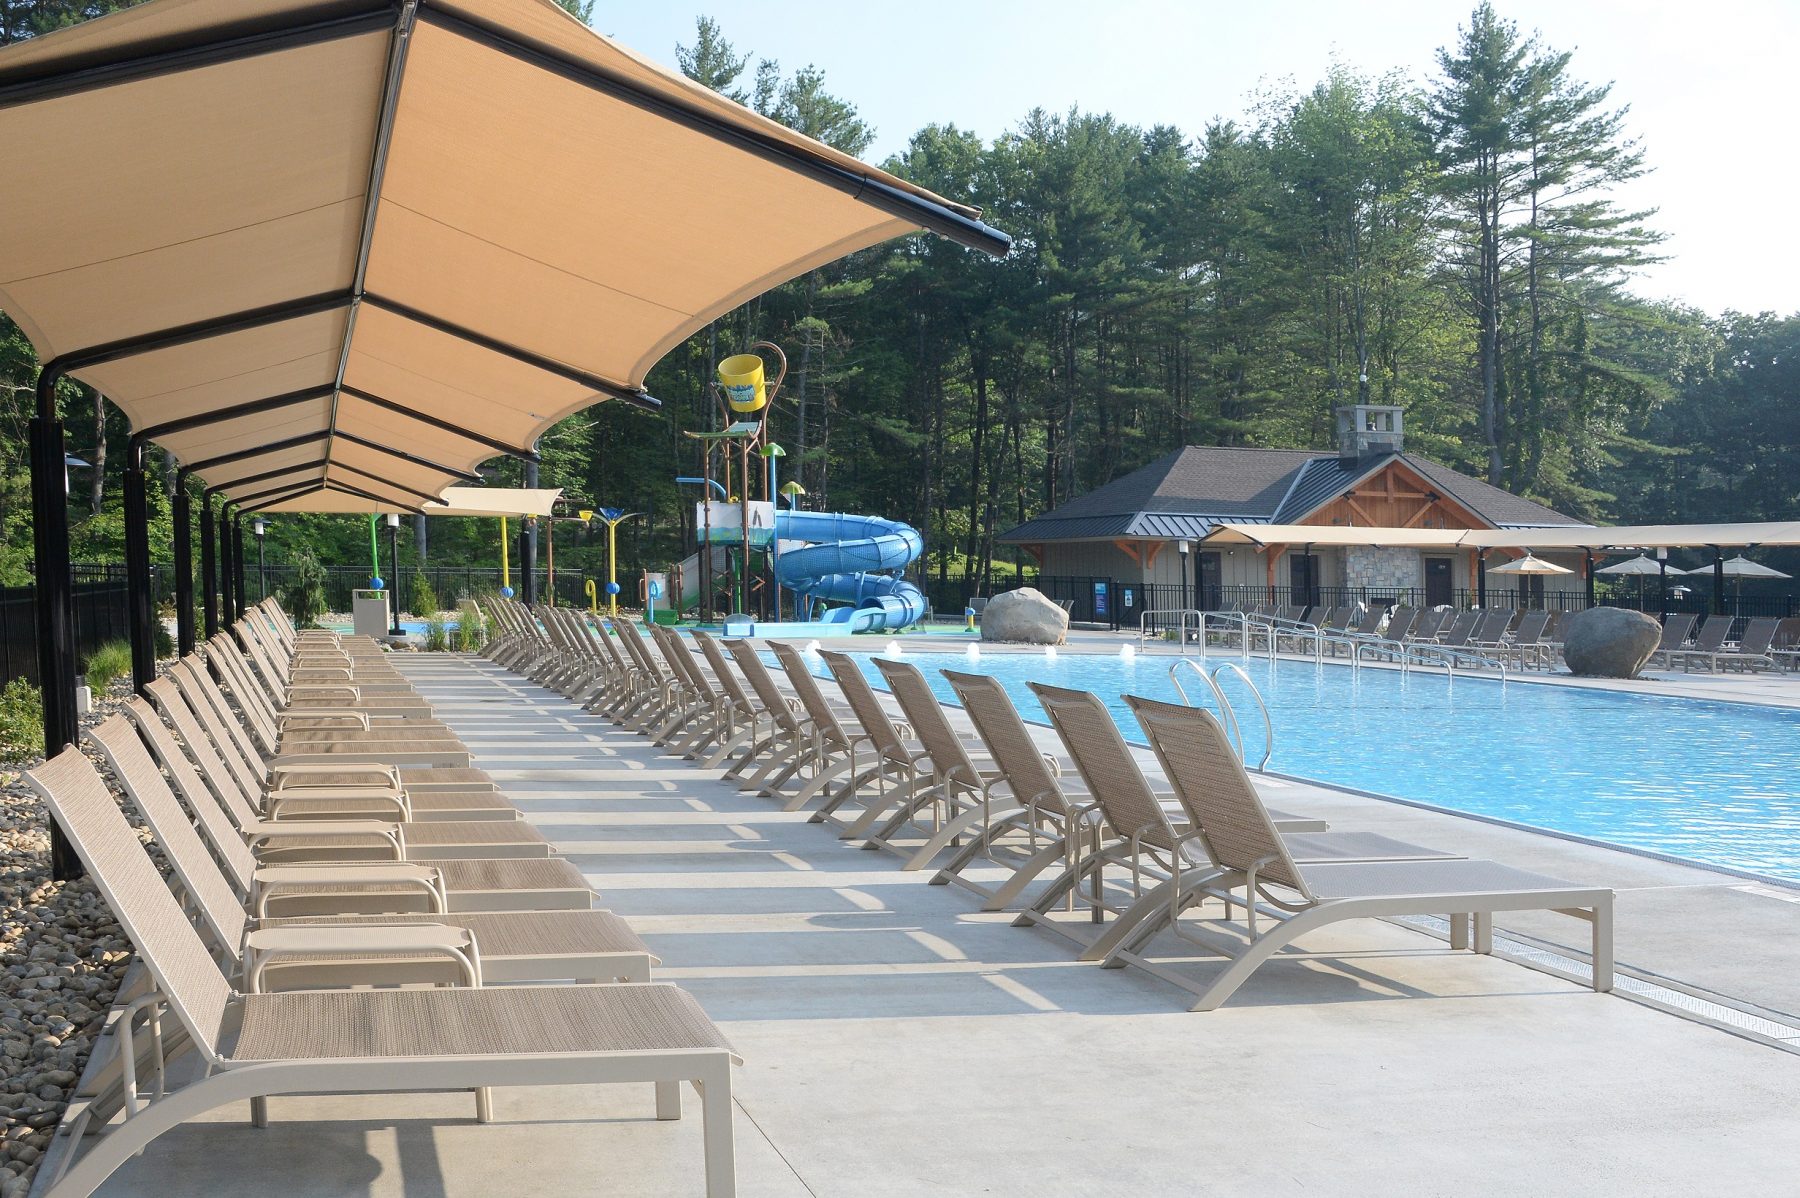 In the foreground the chairs are shown in two rows.  The back row is under a large shade and the front row is out in the sun. In front of the chairs the pool is shown.  In the background of the photo the splashpad area including the slide and dump bucket are shown. In the far right corner the Cascade Cove Bathroom facilities are shown.